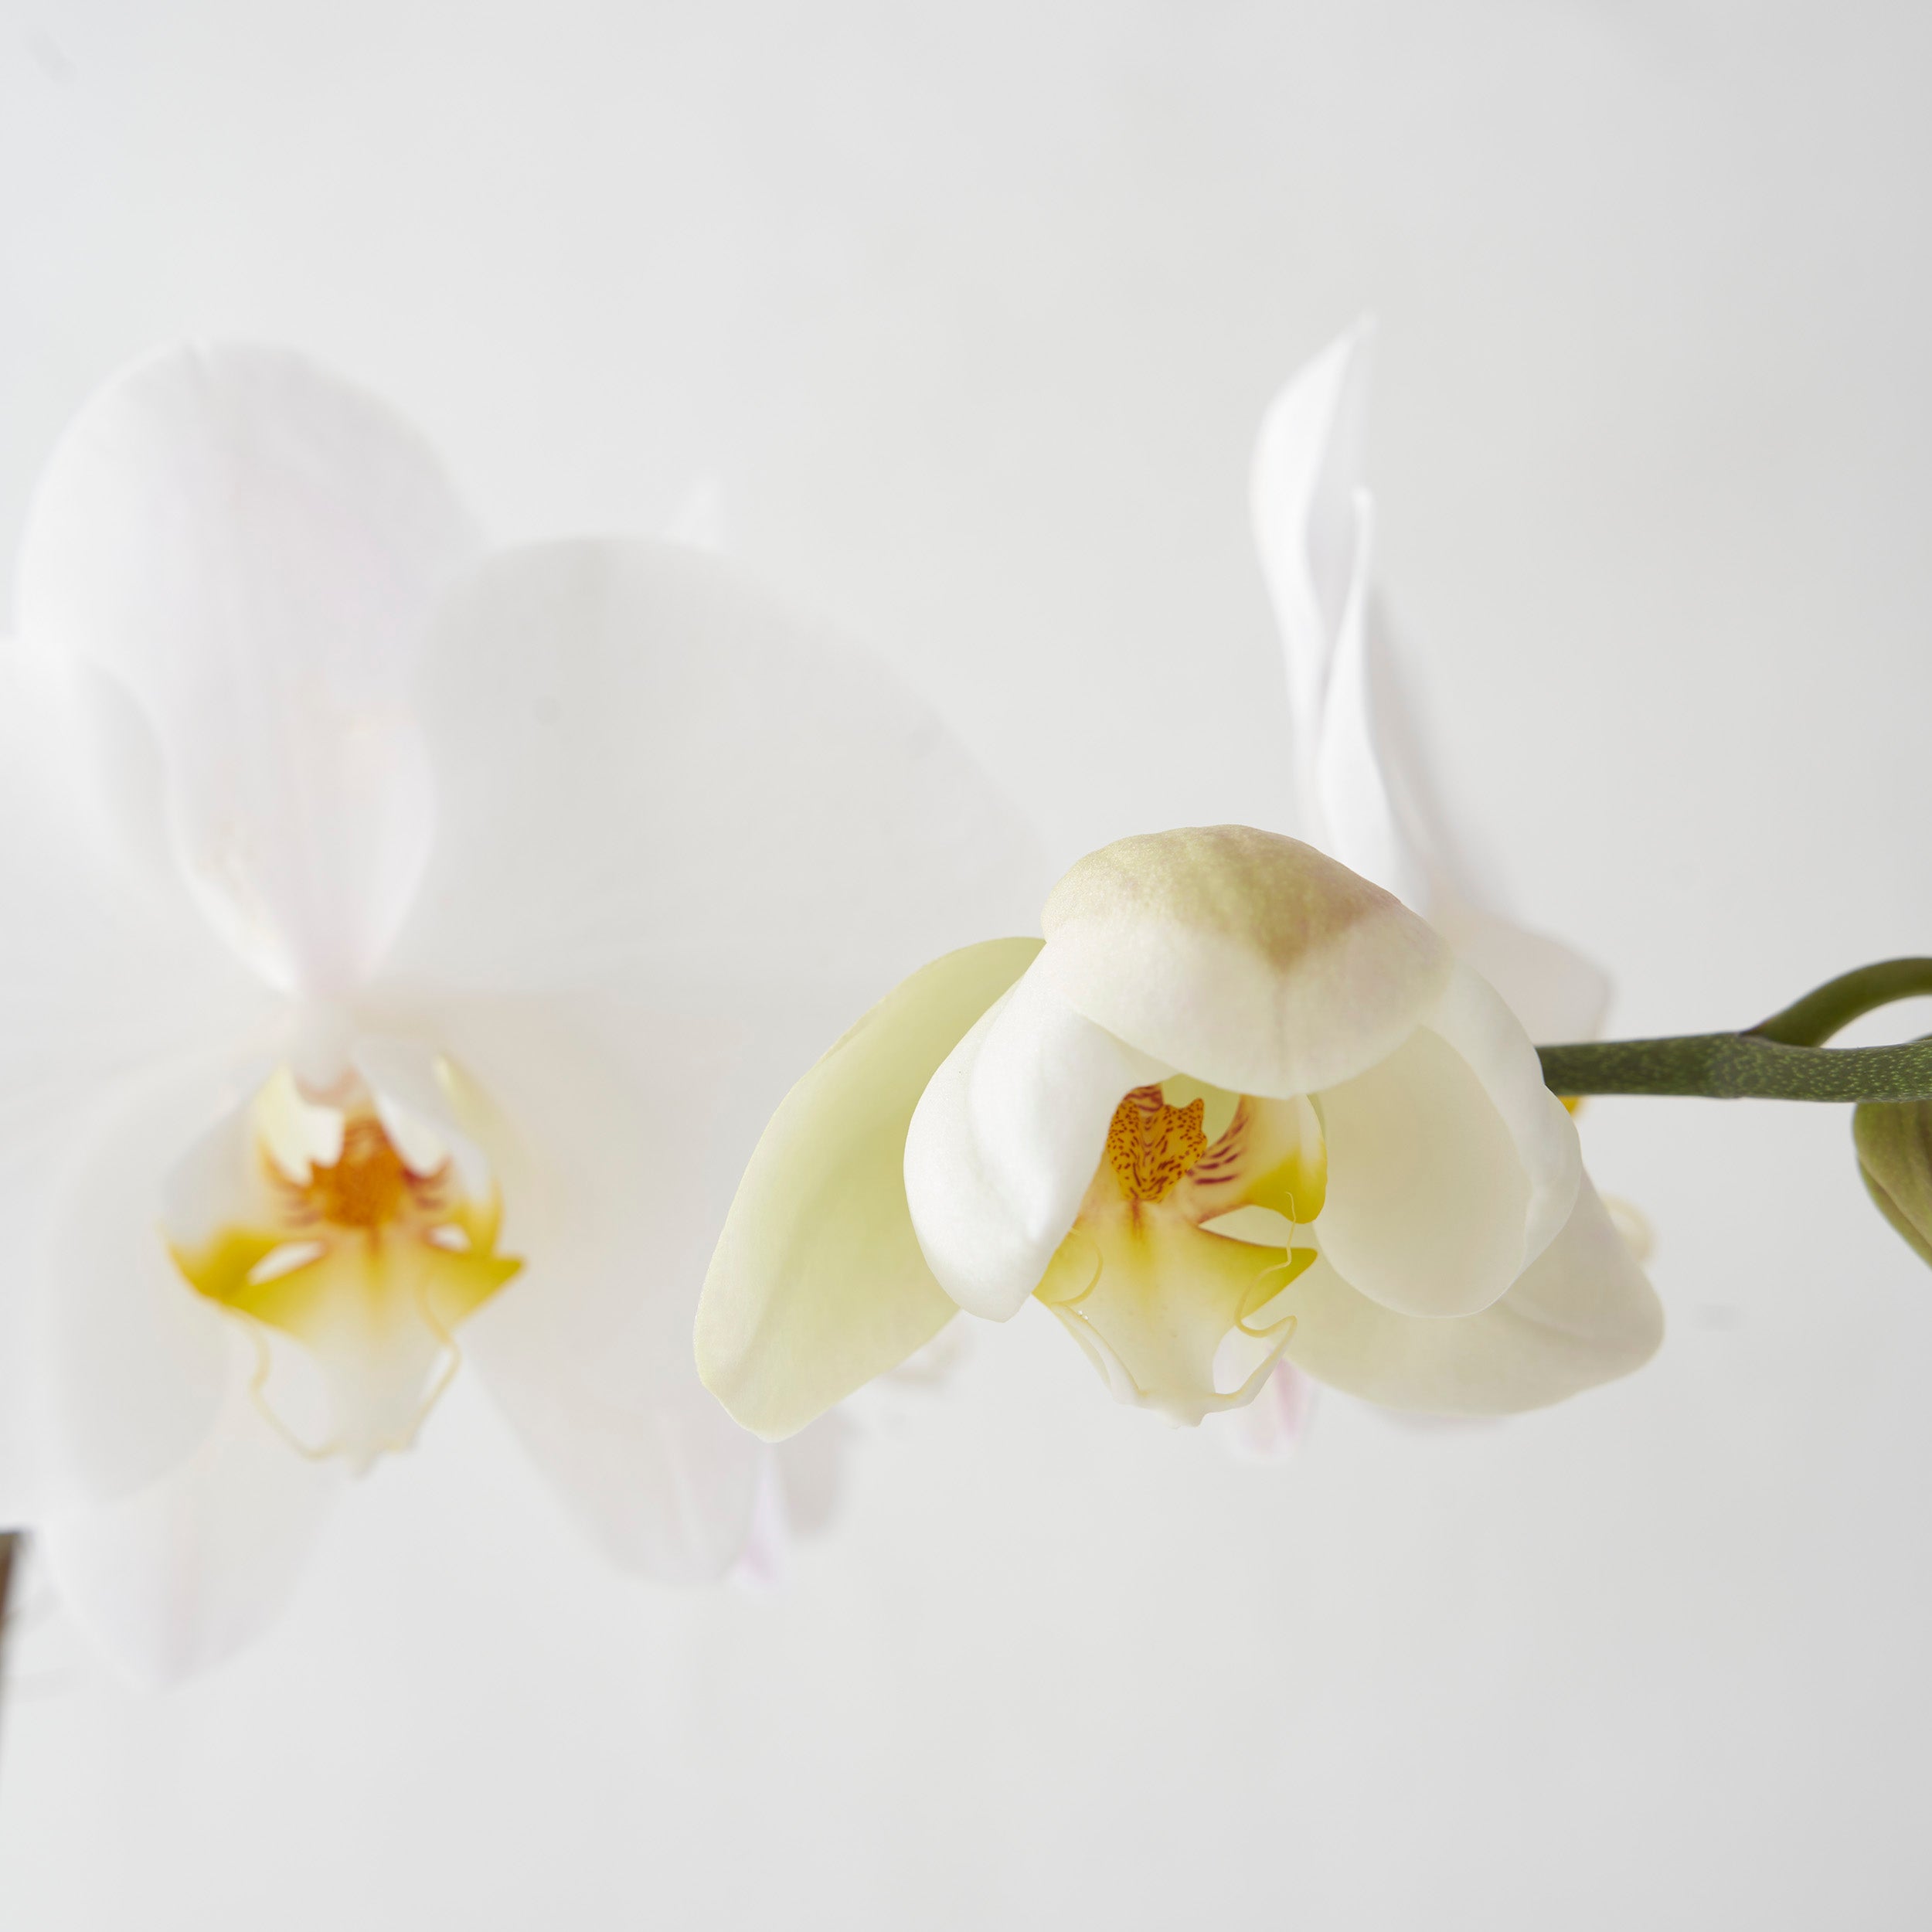 Closeup of white phalaenopsis orchid flower on white background.